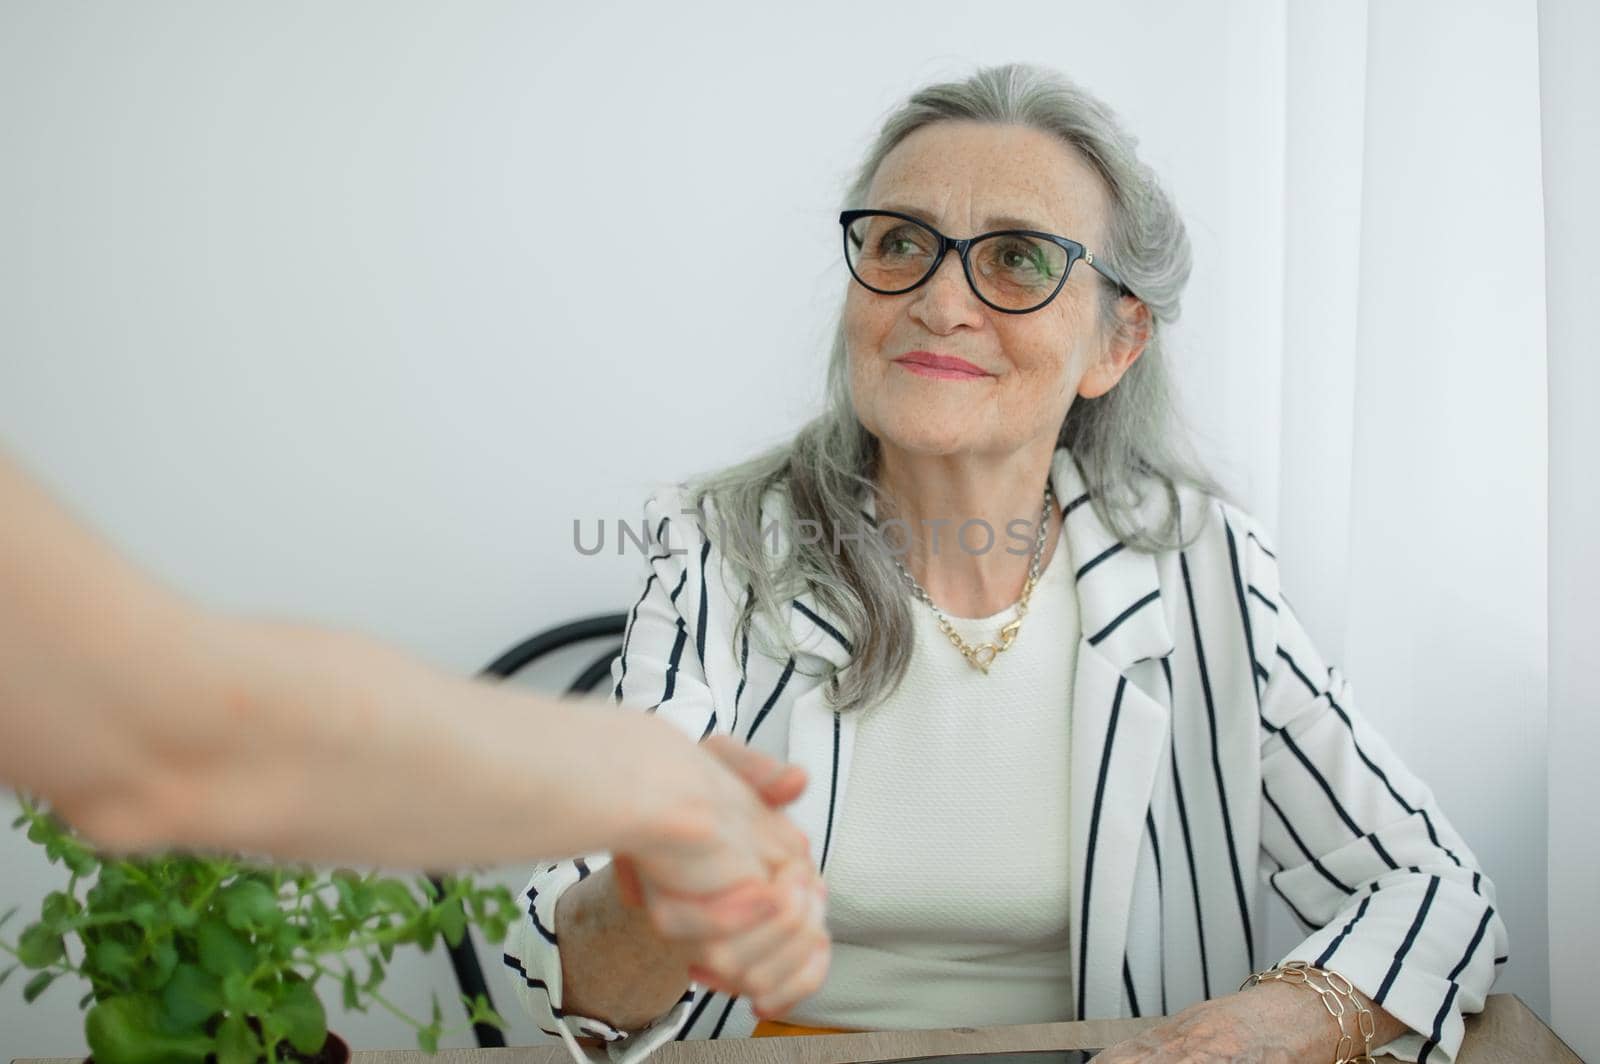 Mature businesswoman is leading an interview with new colleague and shaking their hand at the end. Business people concept by balinska_lv